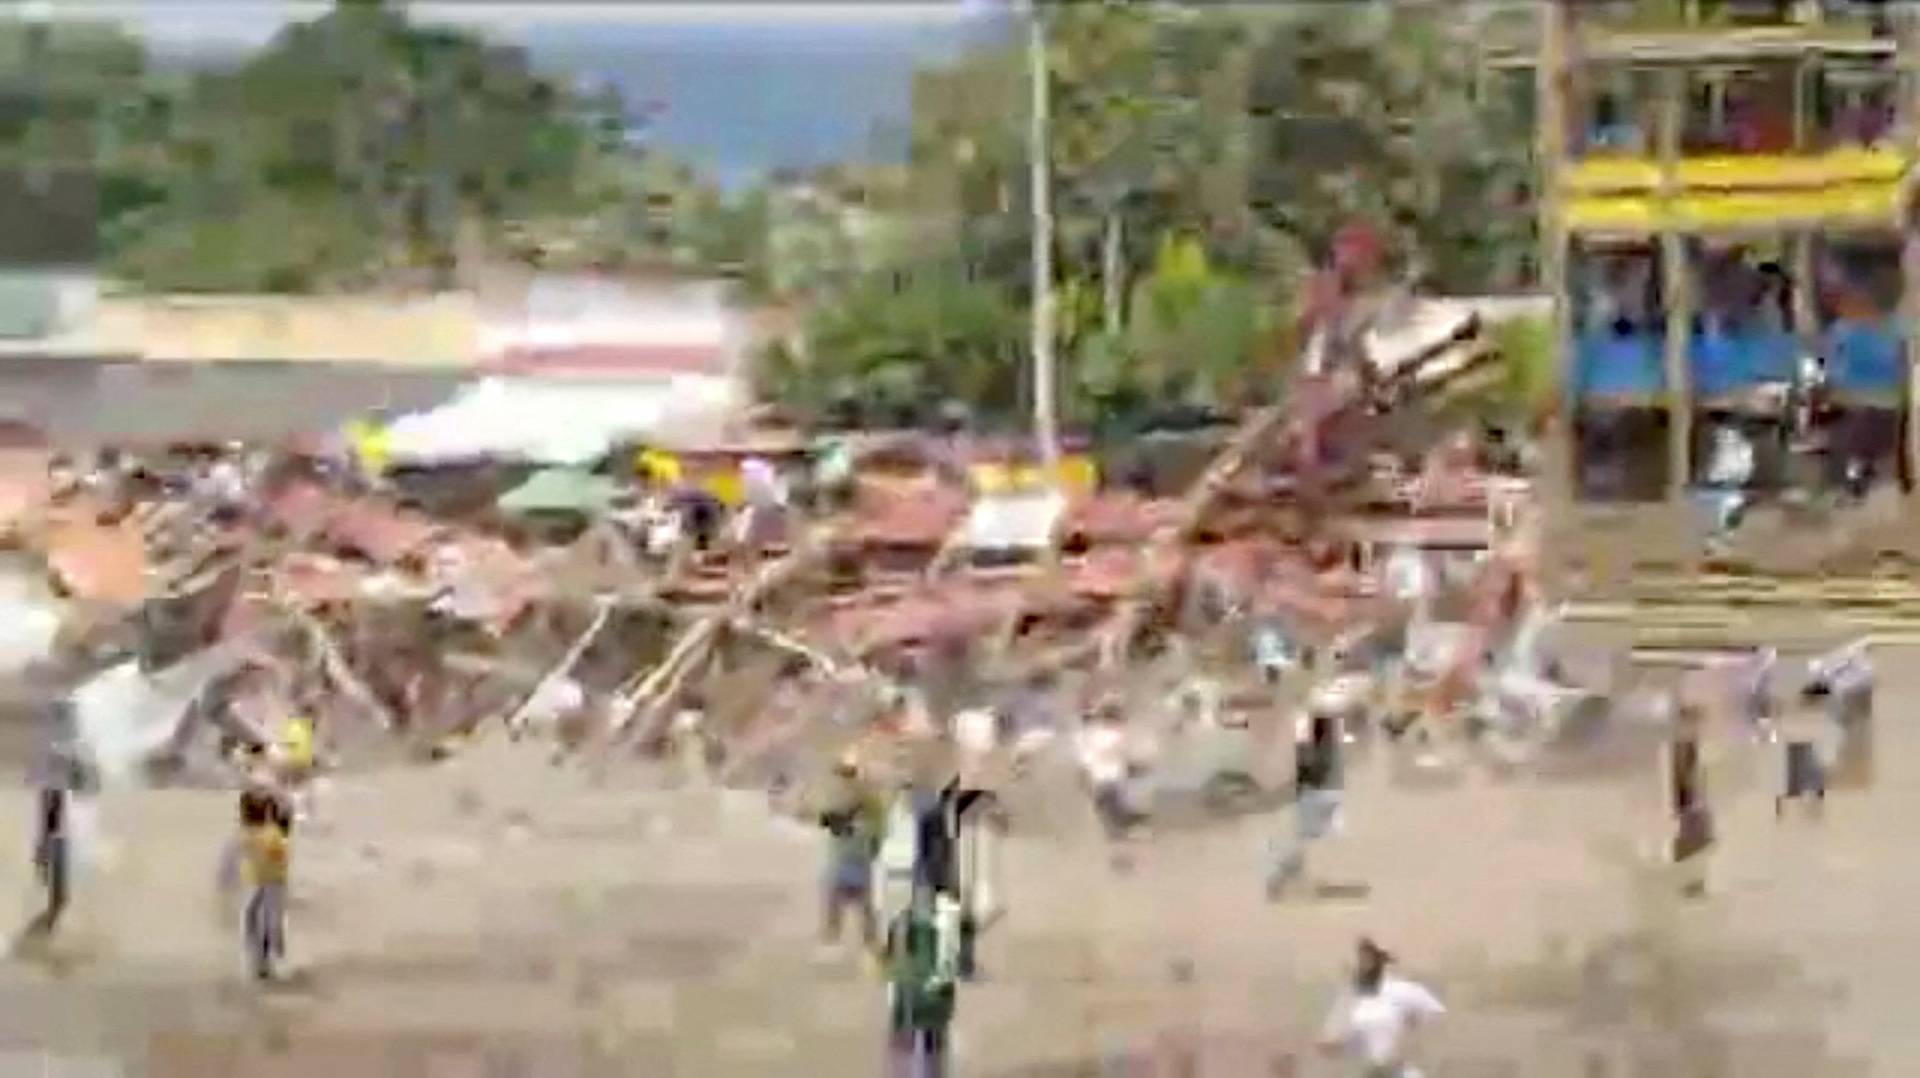 Stands collapse during the celebration of the San Pedro festivities in El Espina